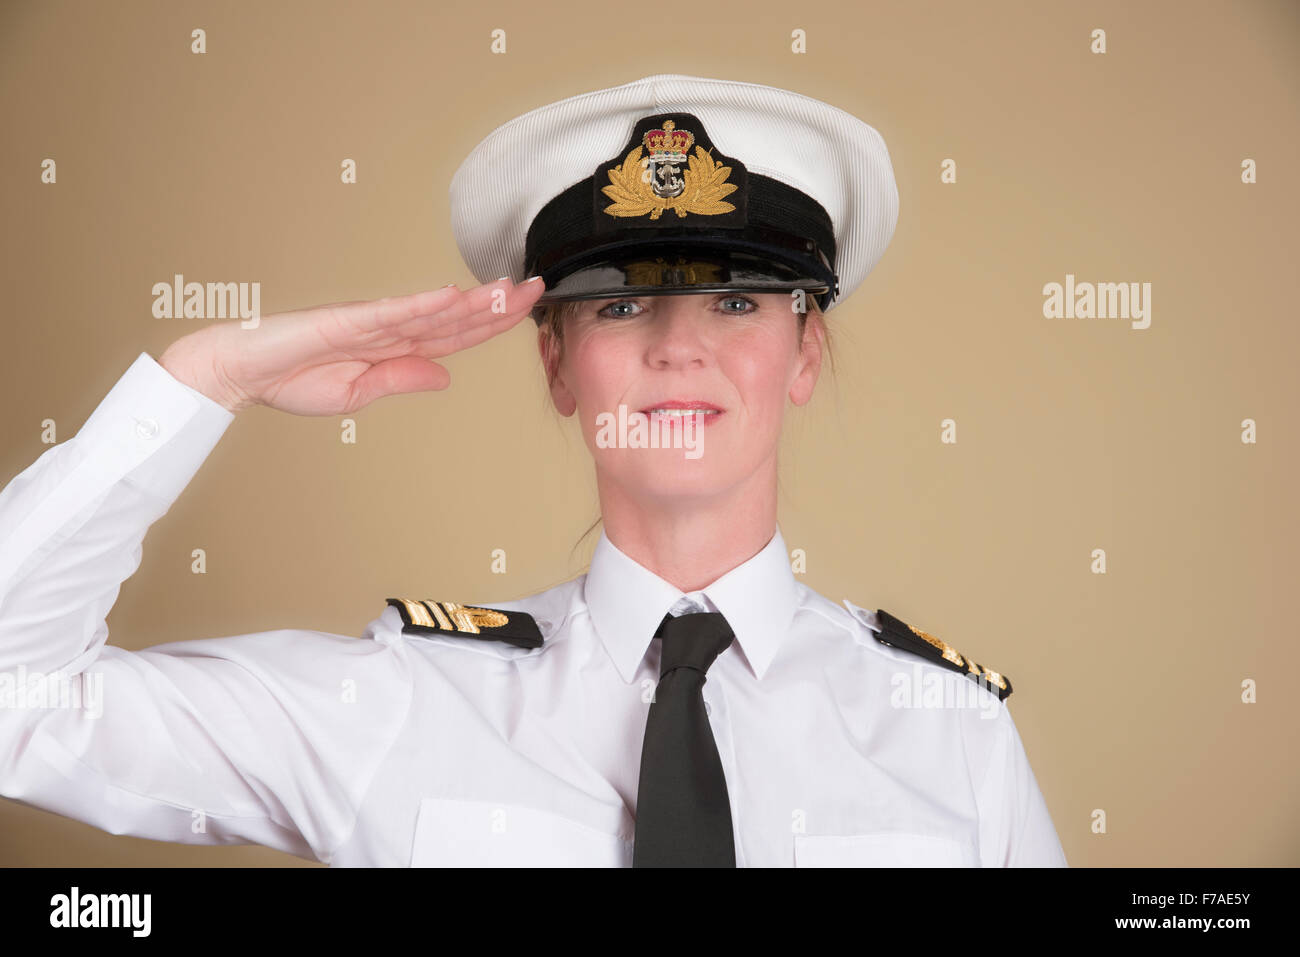 Female navy officer in uniform of a Lt Commander wearing a hat and saluting Stock Photo